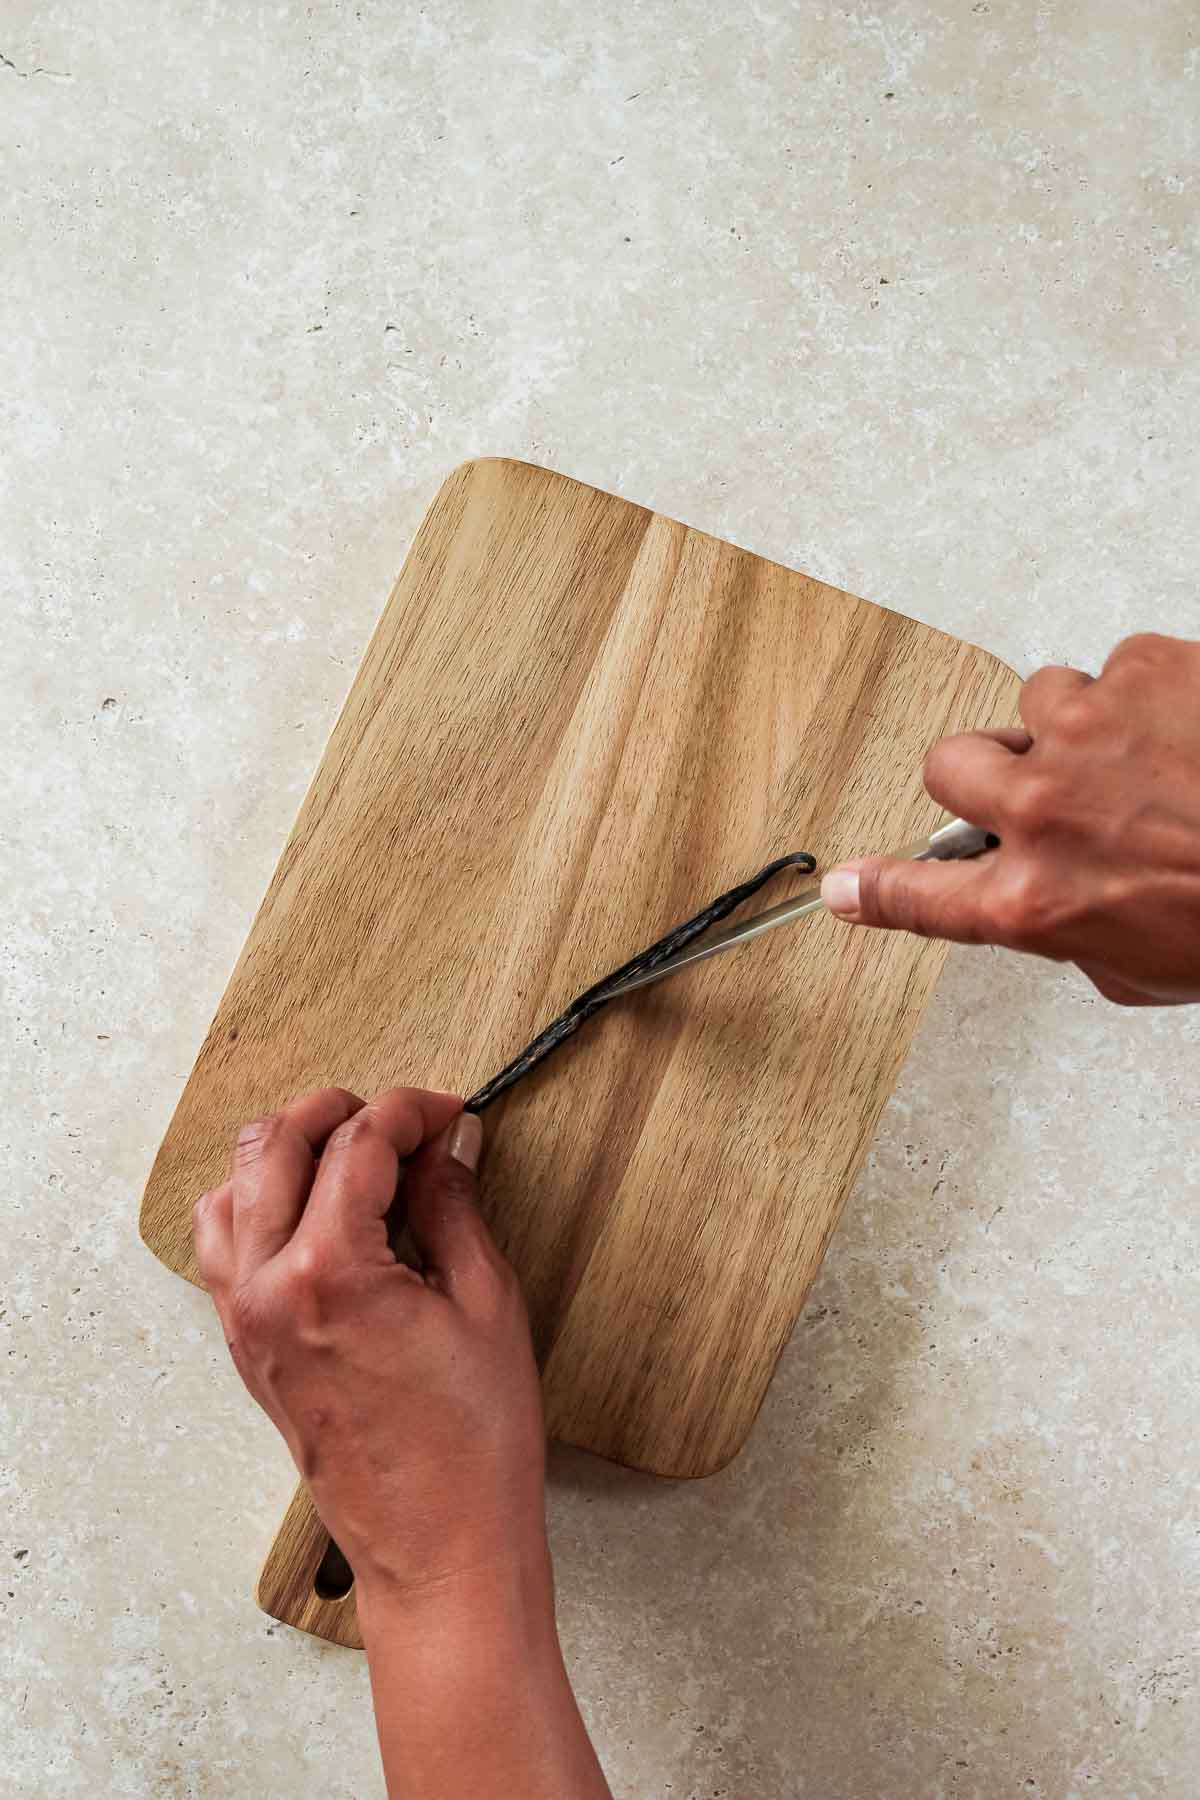 slicing vanilla bean open with a knife on wooden cutting board.